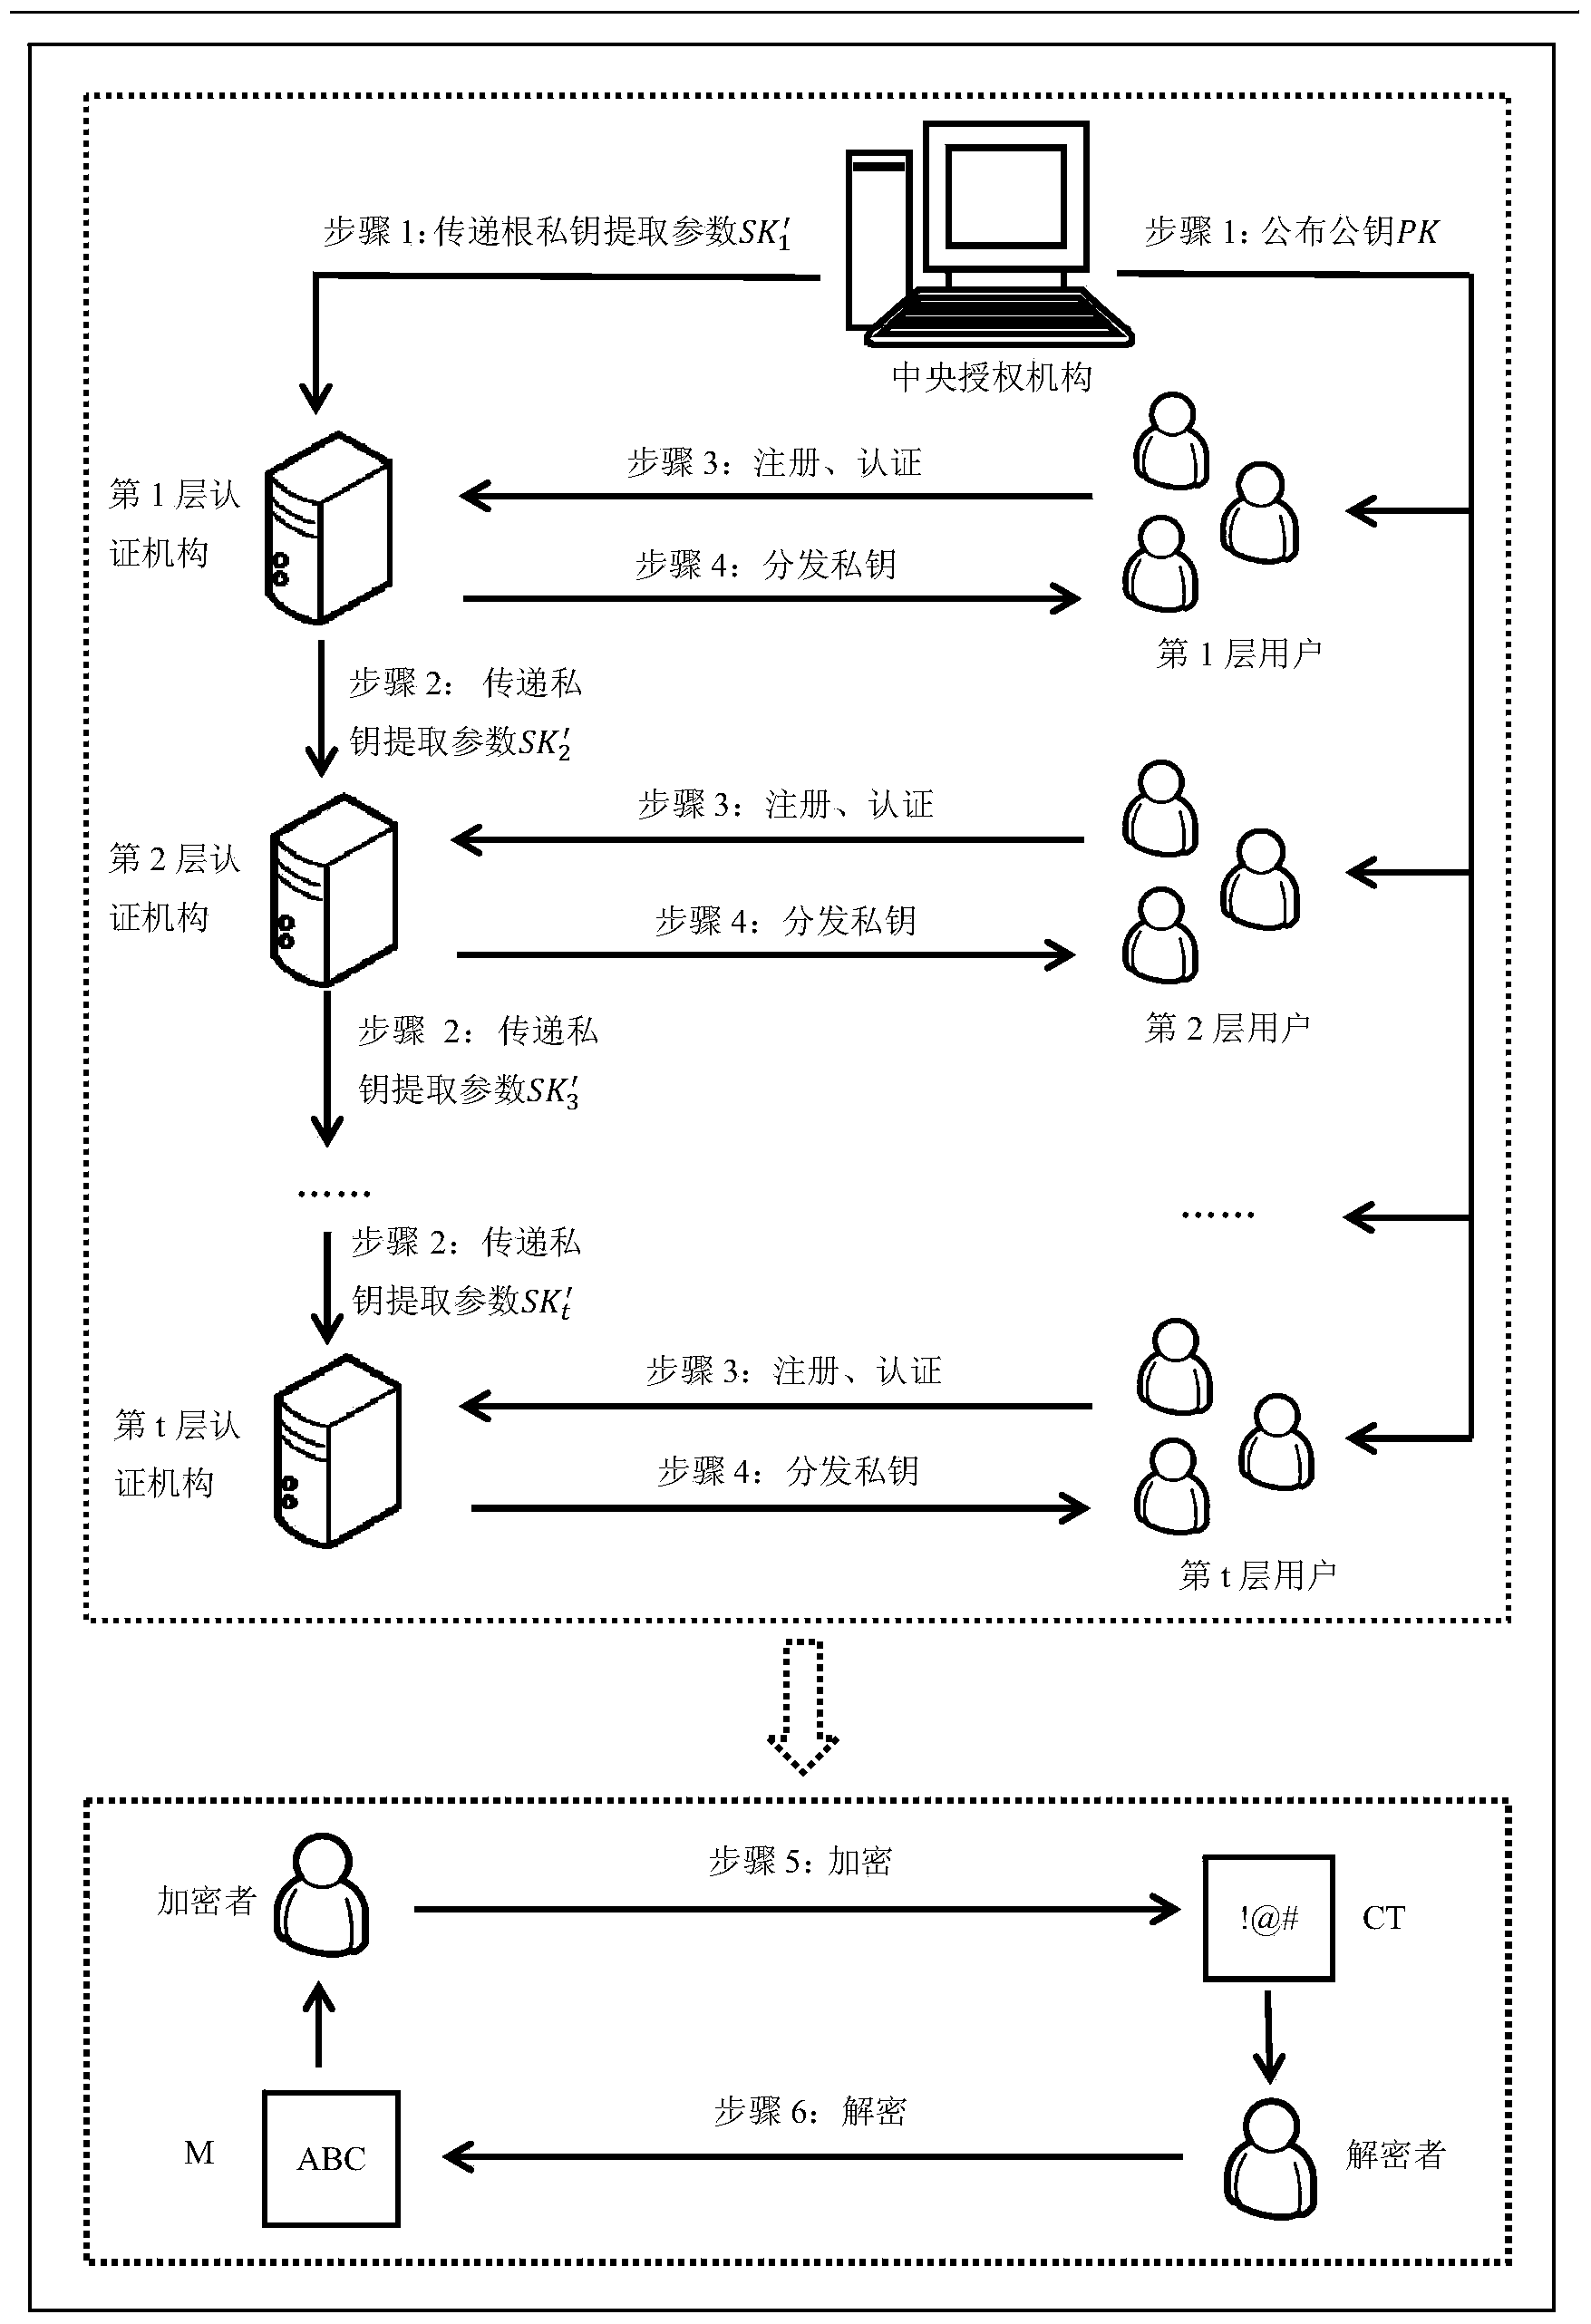 Attribute-based encryption method for achieving hierarchical certification authority